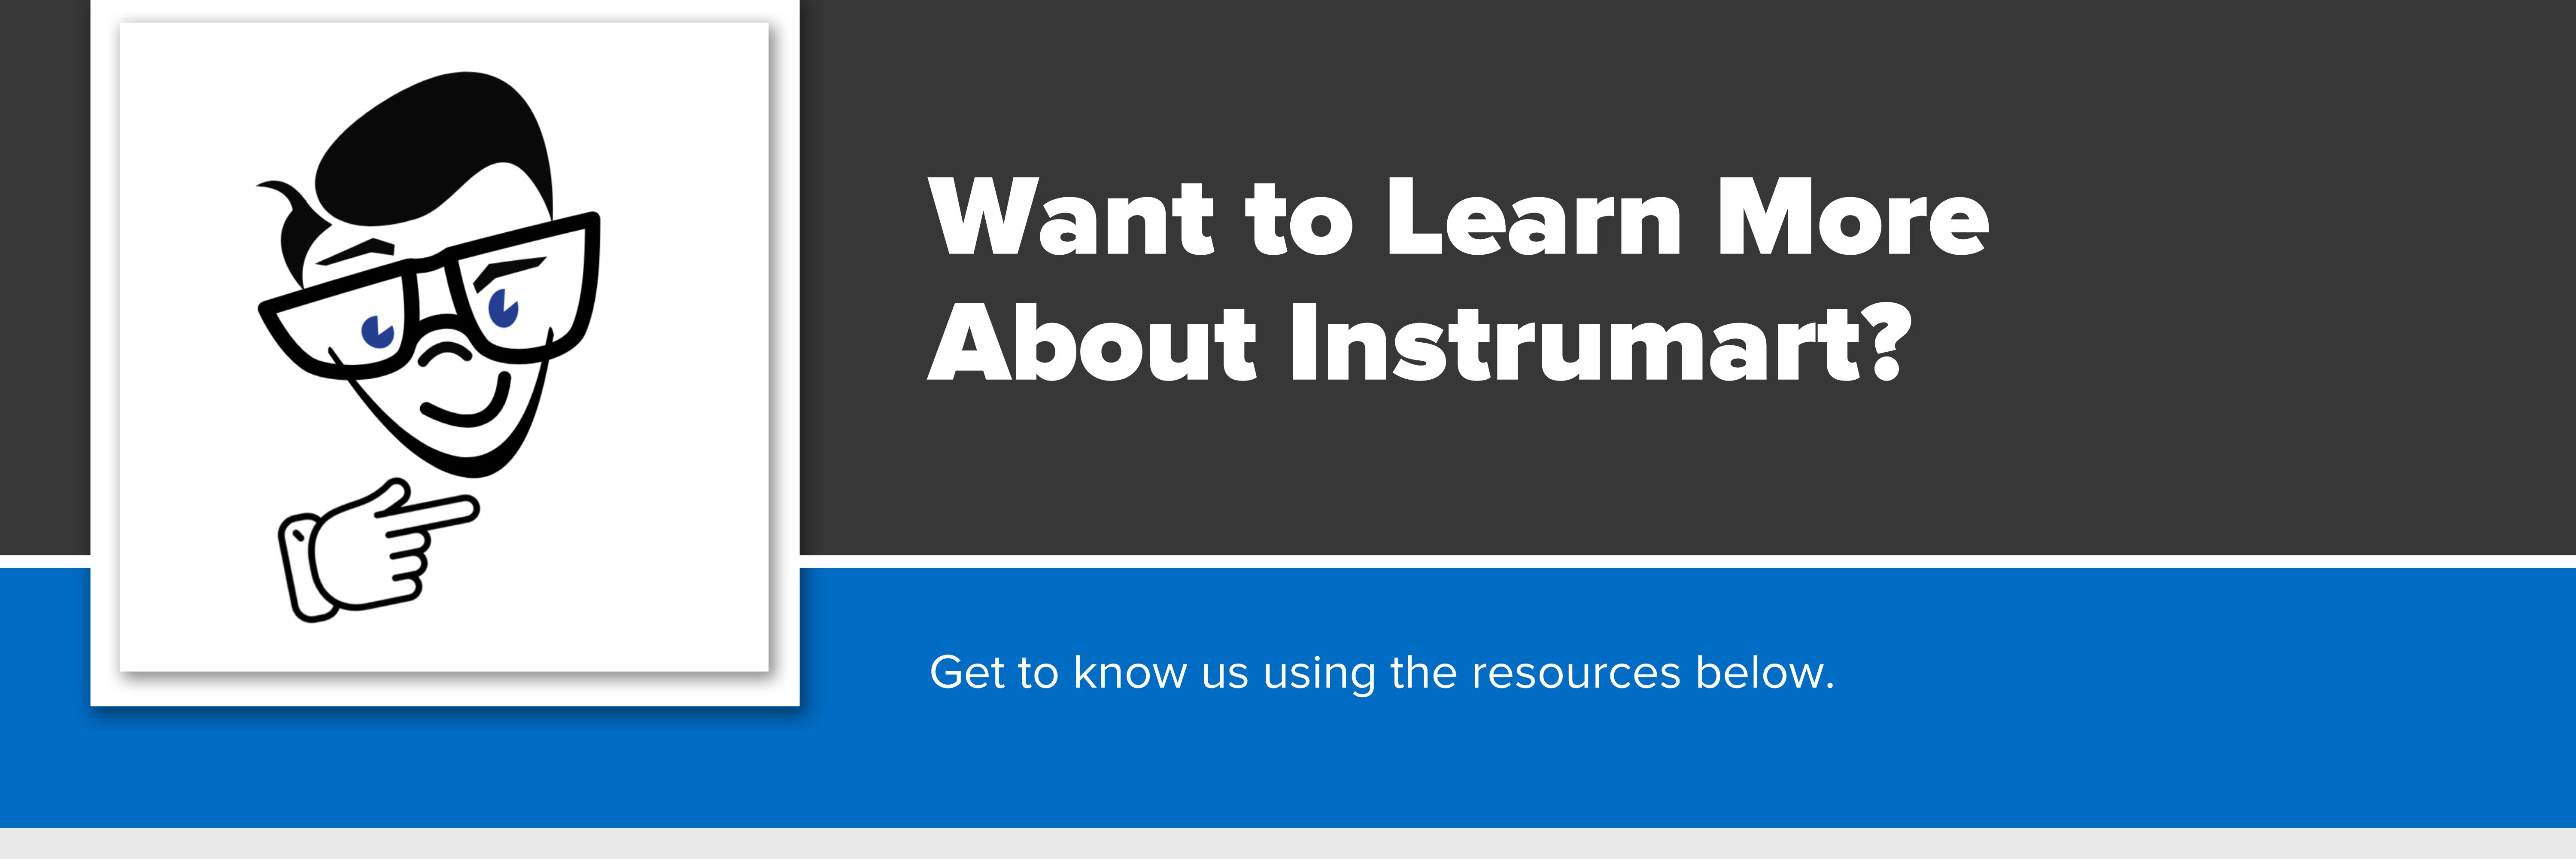 Header image with text "Want to Learn More About Instrumart?"